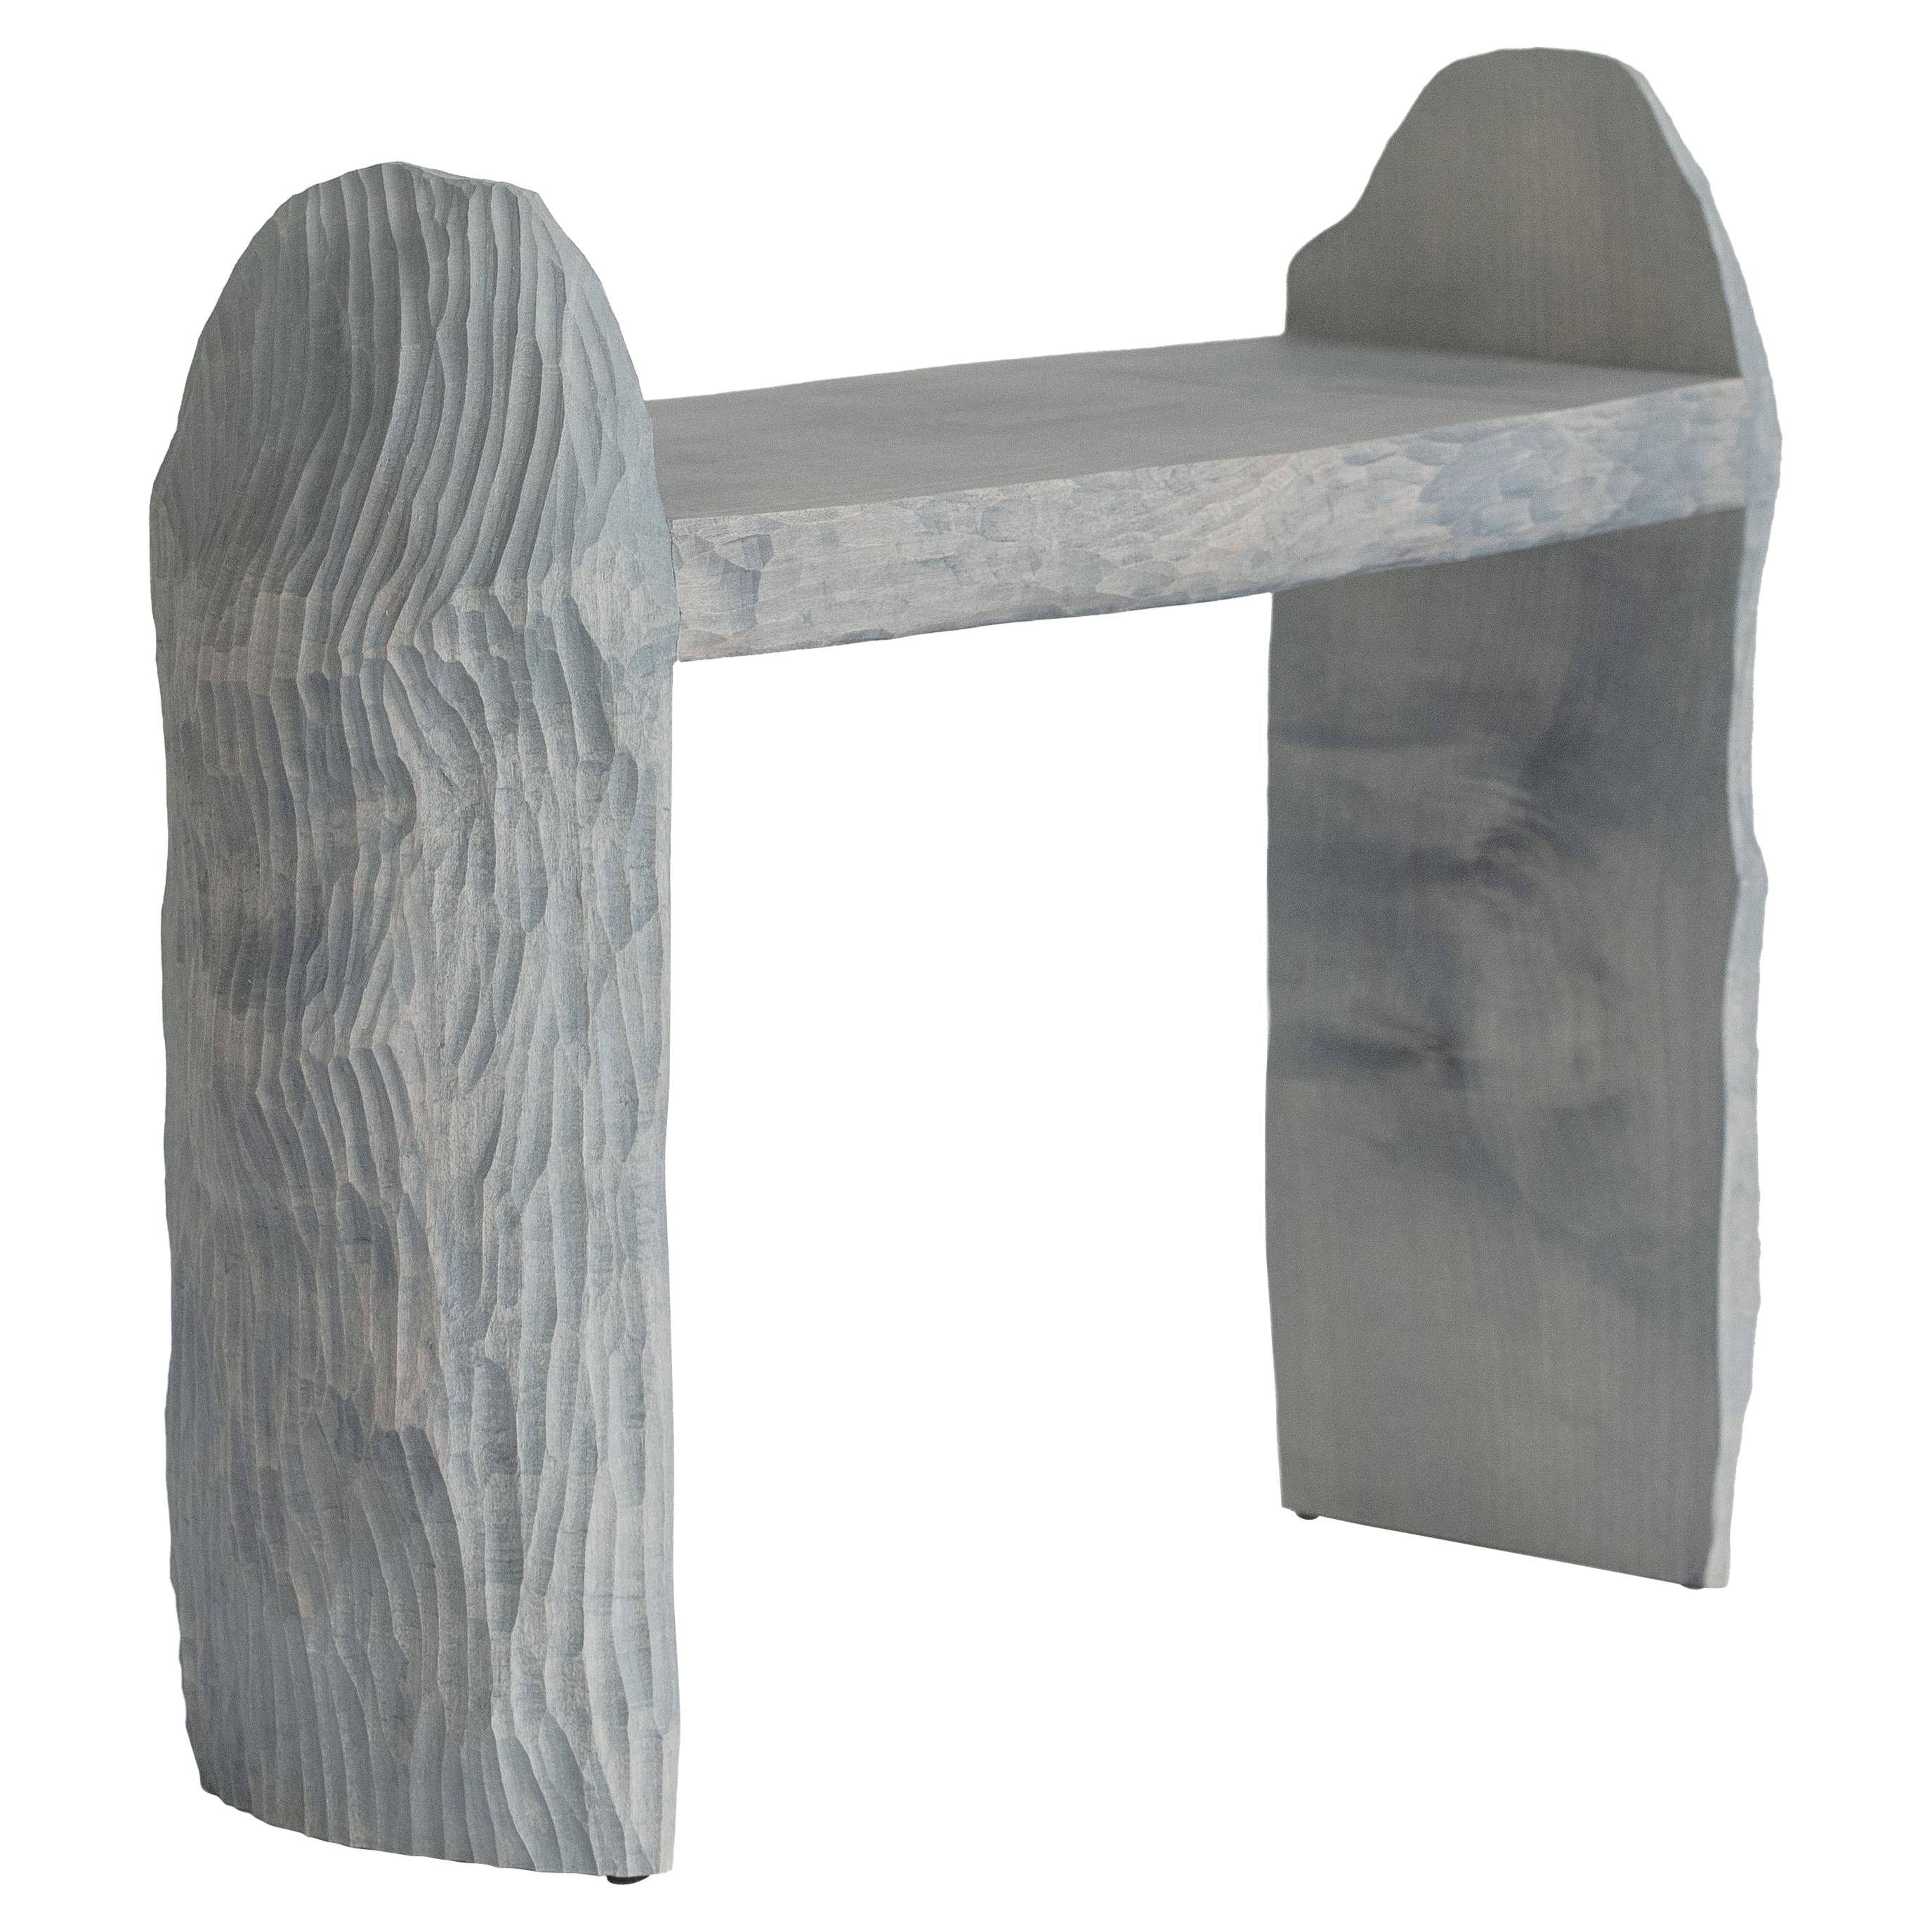 Contemporary sculpted wood dyed INTUITIVE ARCHAISME bench by Cedric Breisacher